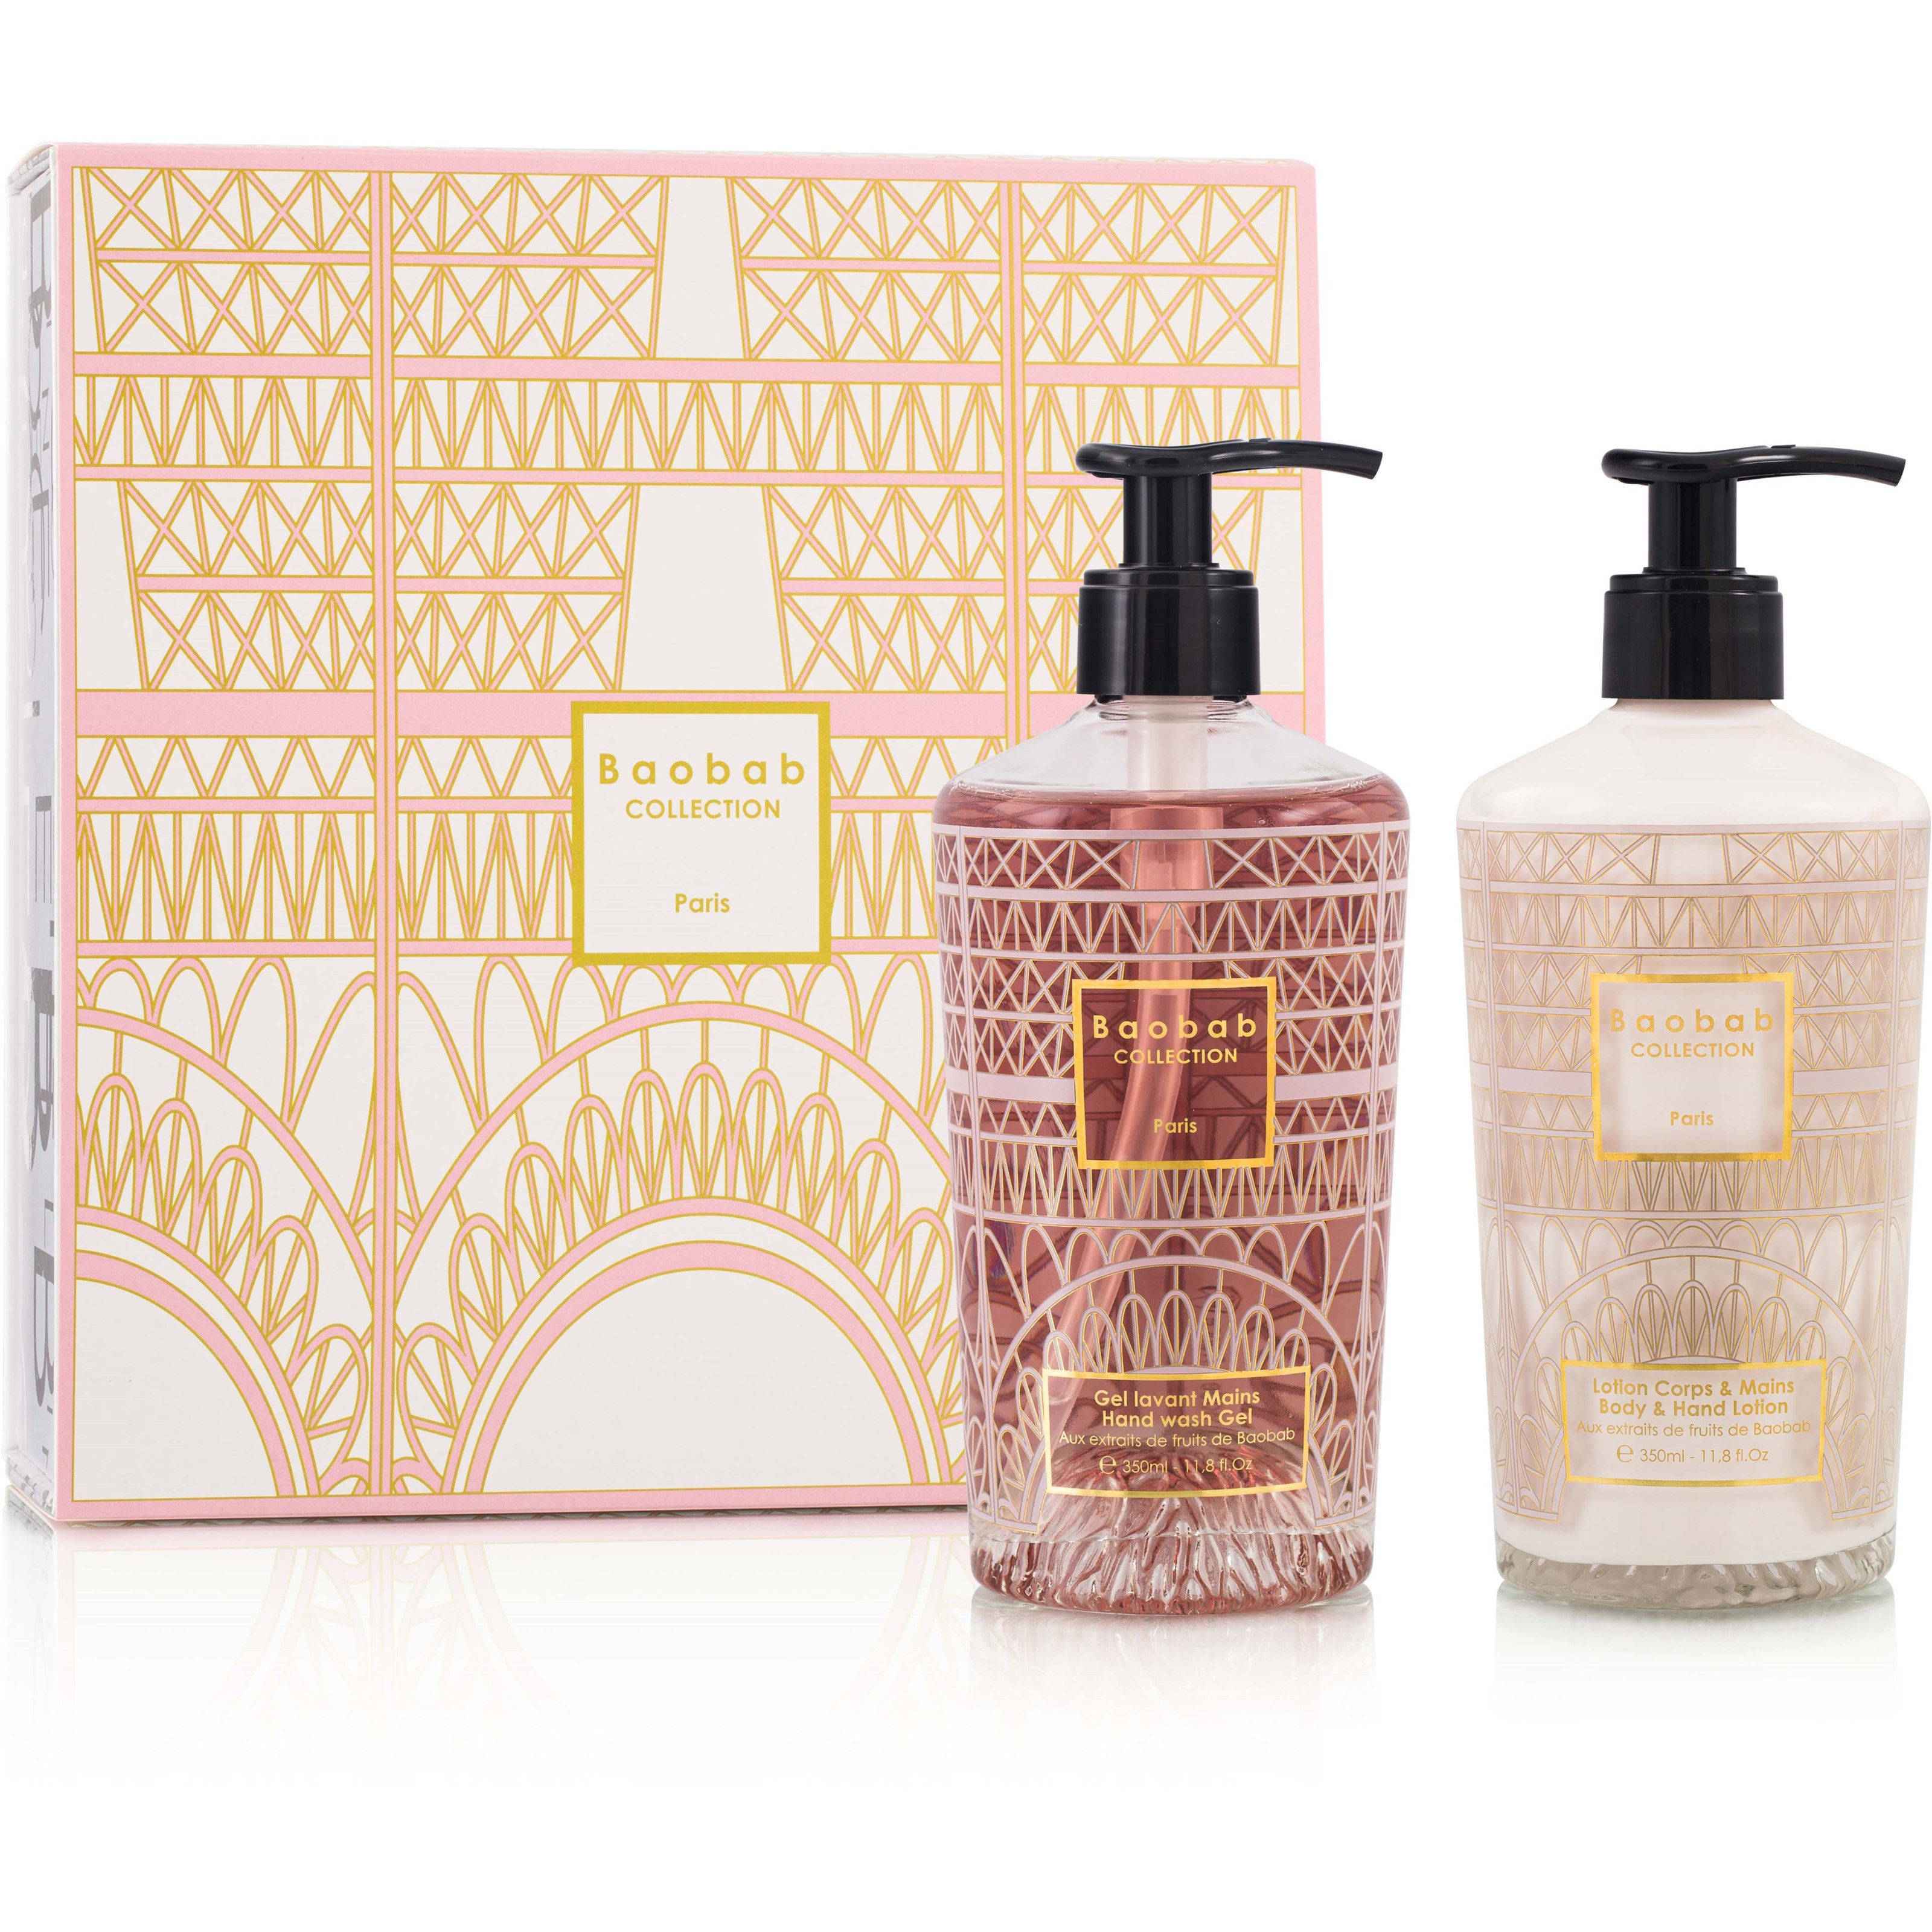 Baobab Collection Paris Gift Box Body & Hand Lotion + Hand Wash Gel